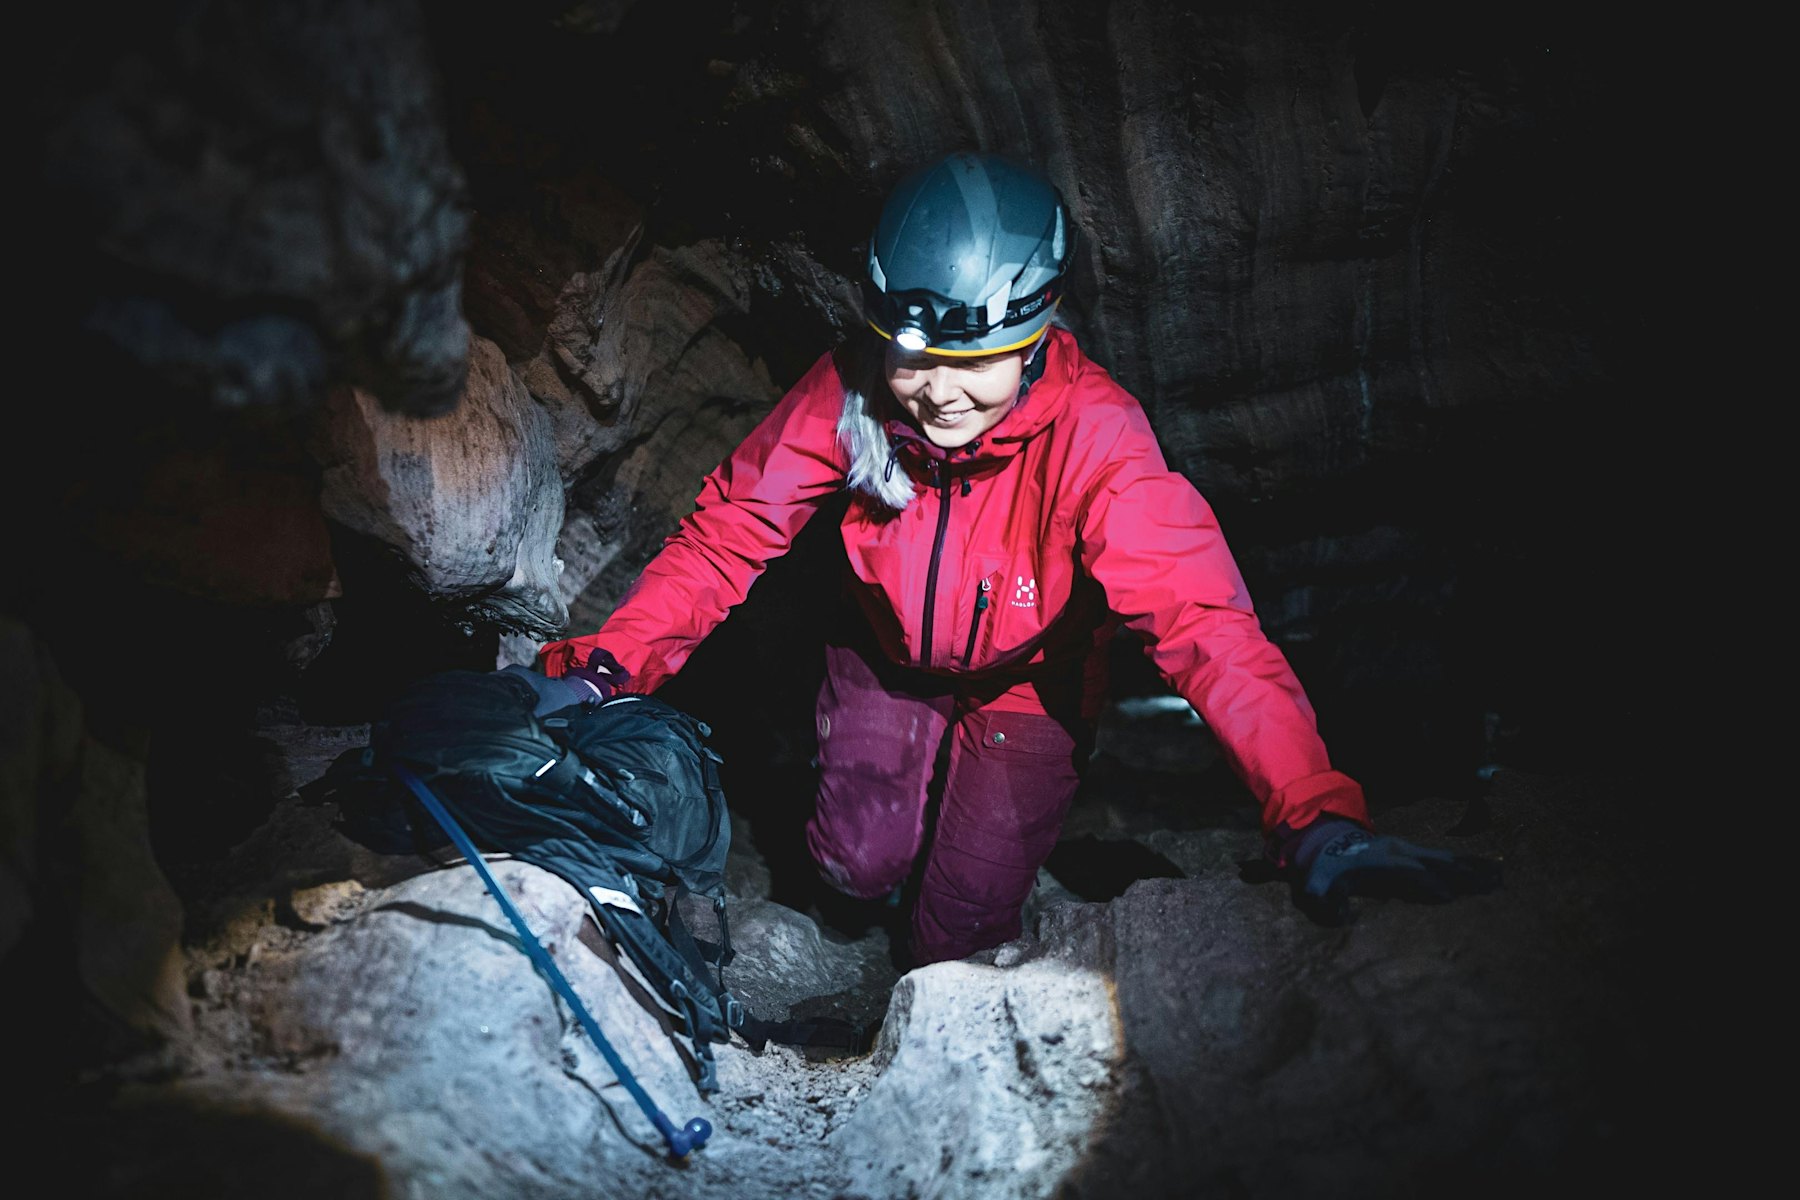 Girl equipped with helmet and headlamp, heading down into cave. Photo